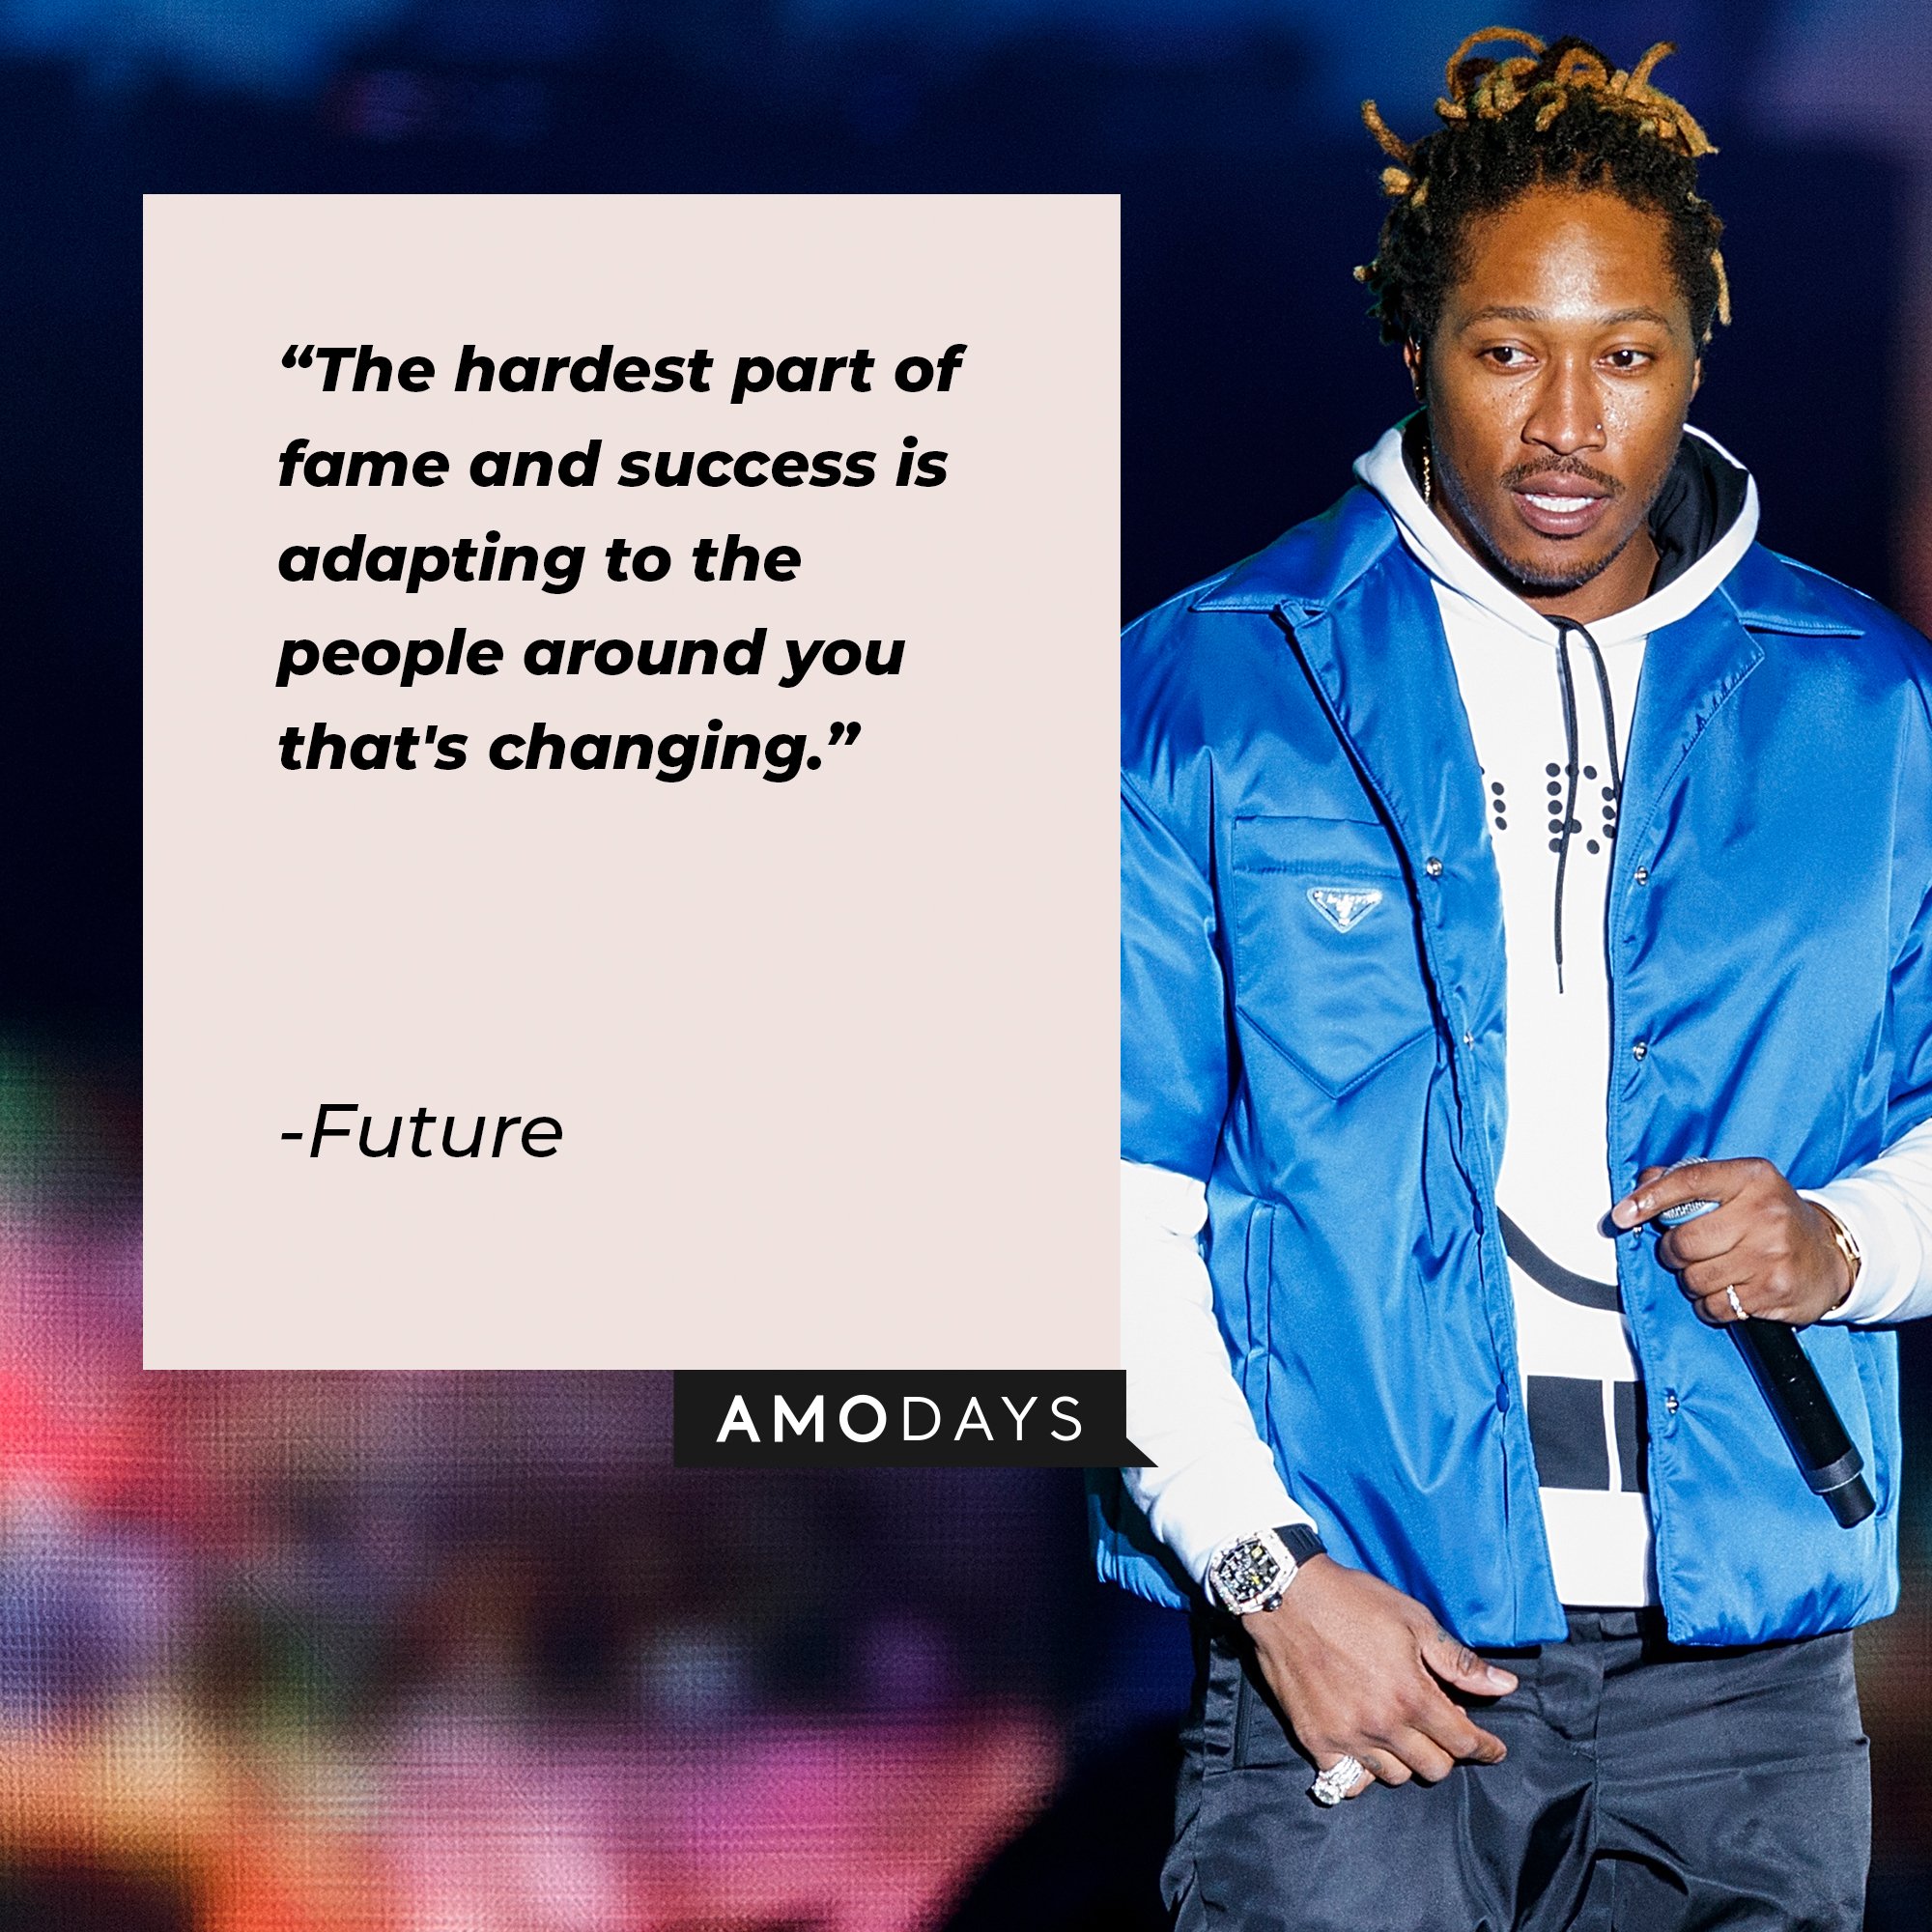 Future’s quote: "The hardest part of fame and success is adapting to the people around you that's changing." | Image: AmoDays